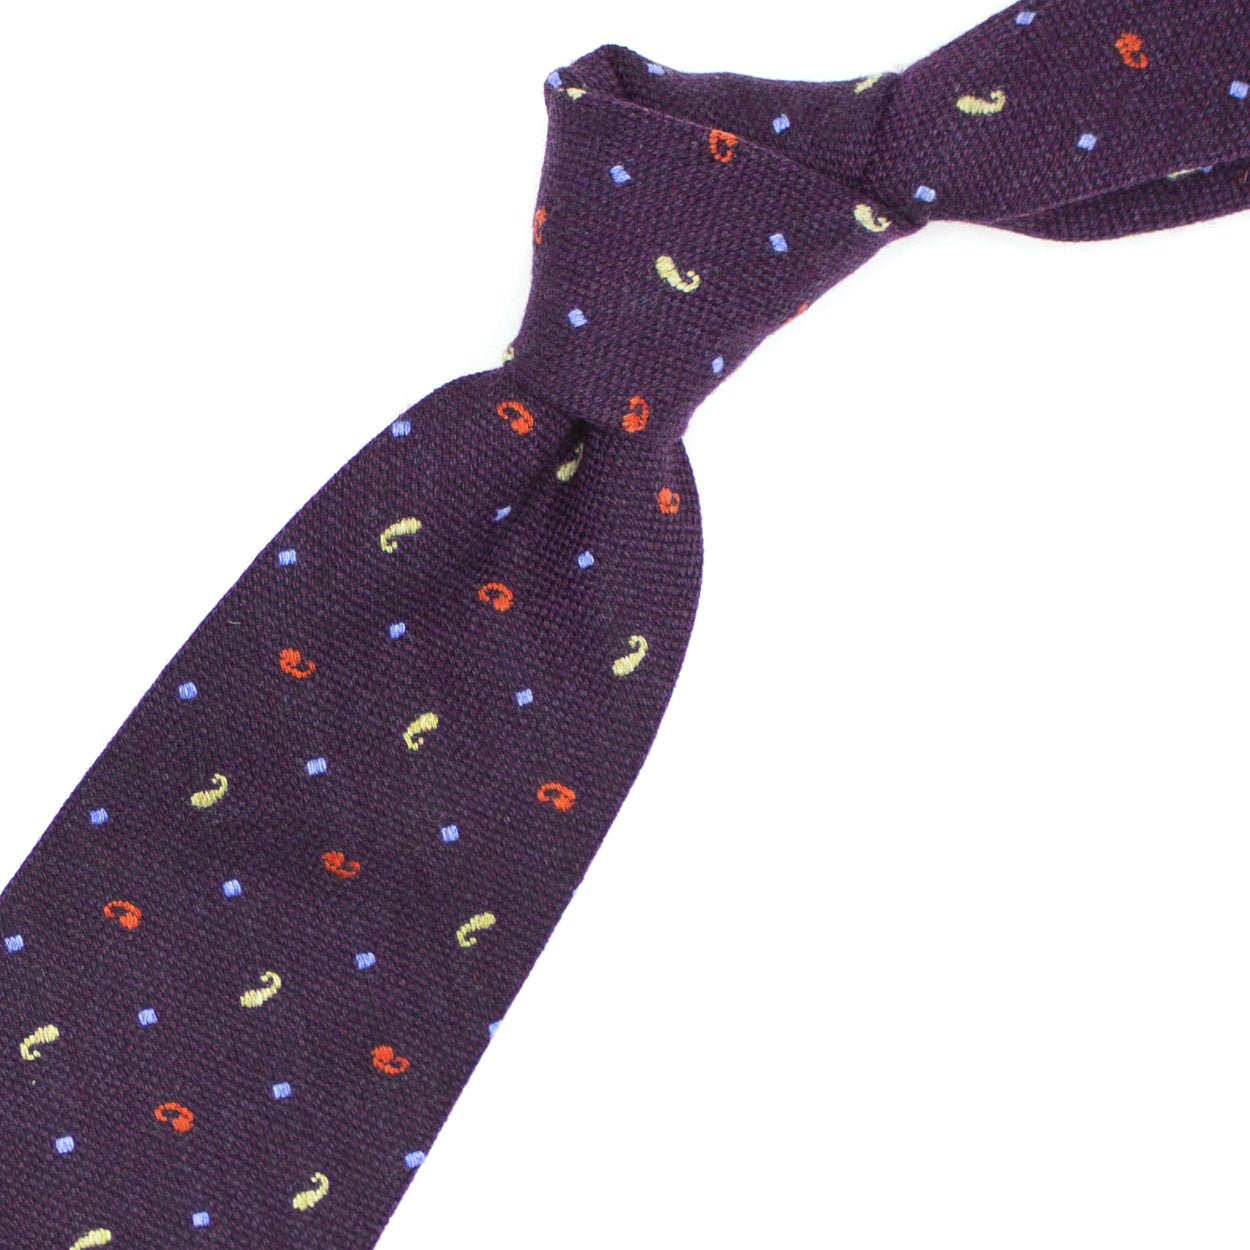 Bordeaux tie with orange and yellow paisleys and blue squares